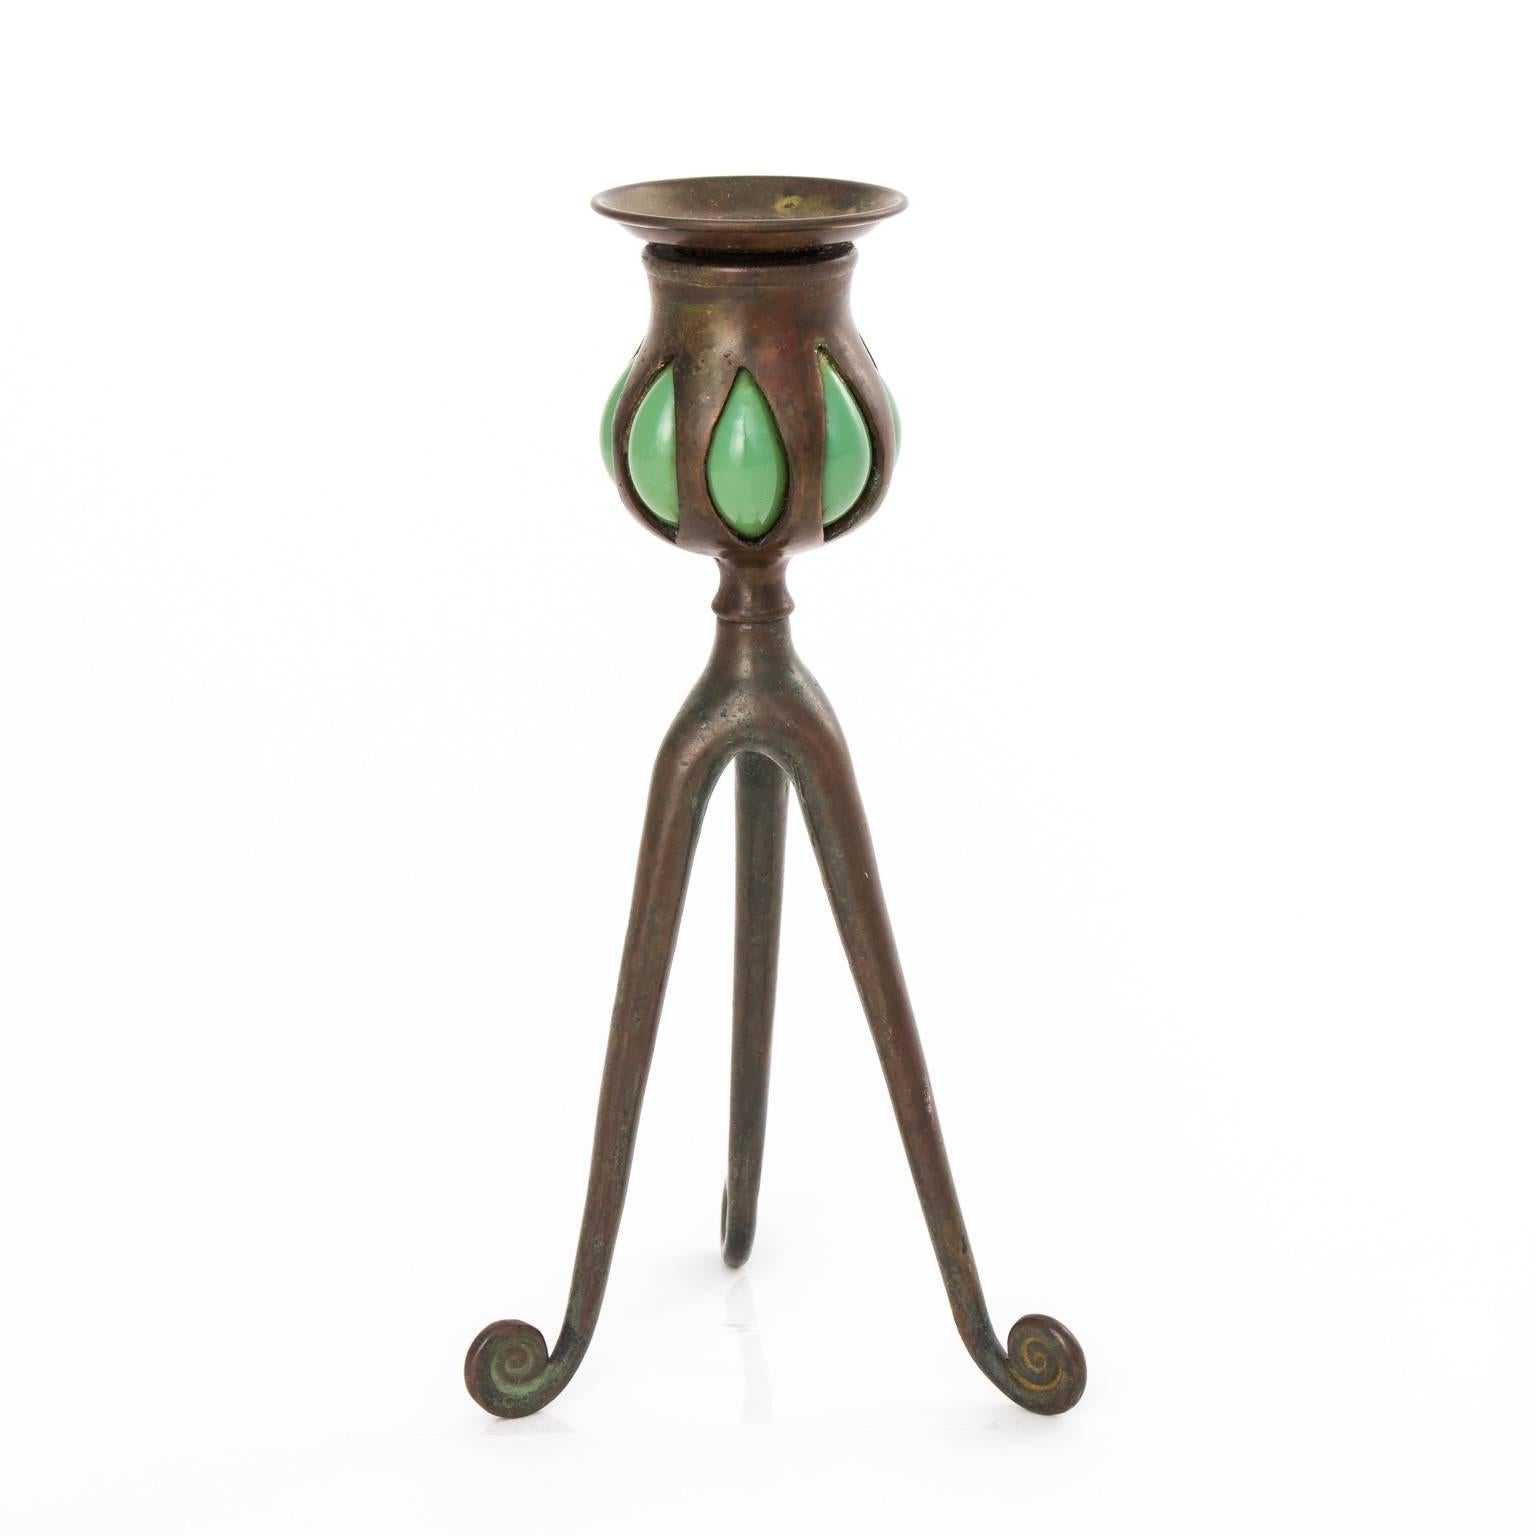 Tiffany Studio three-leg candleholder with green blown glass and curled feet, circa late 19th century.
 